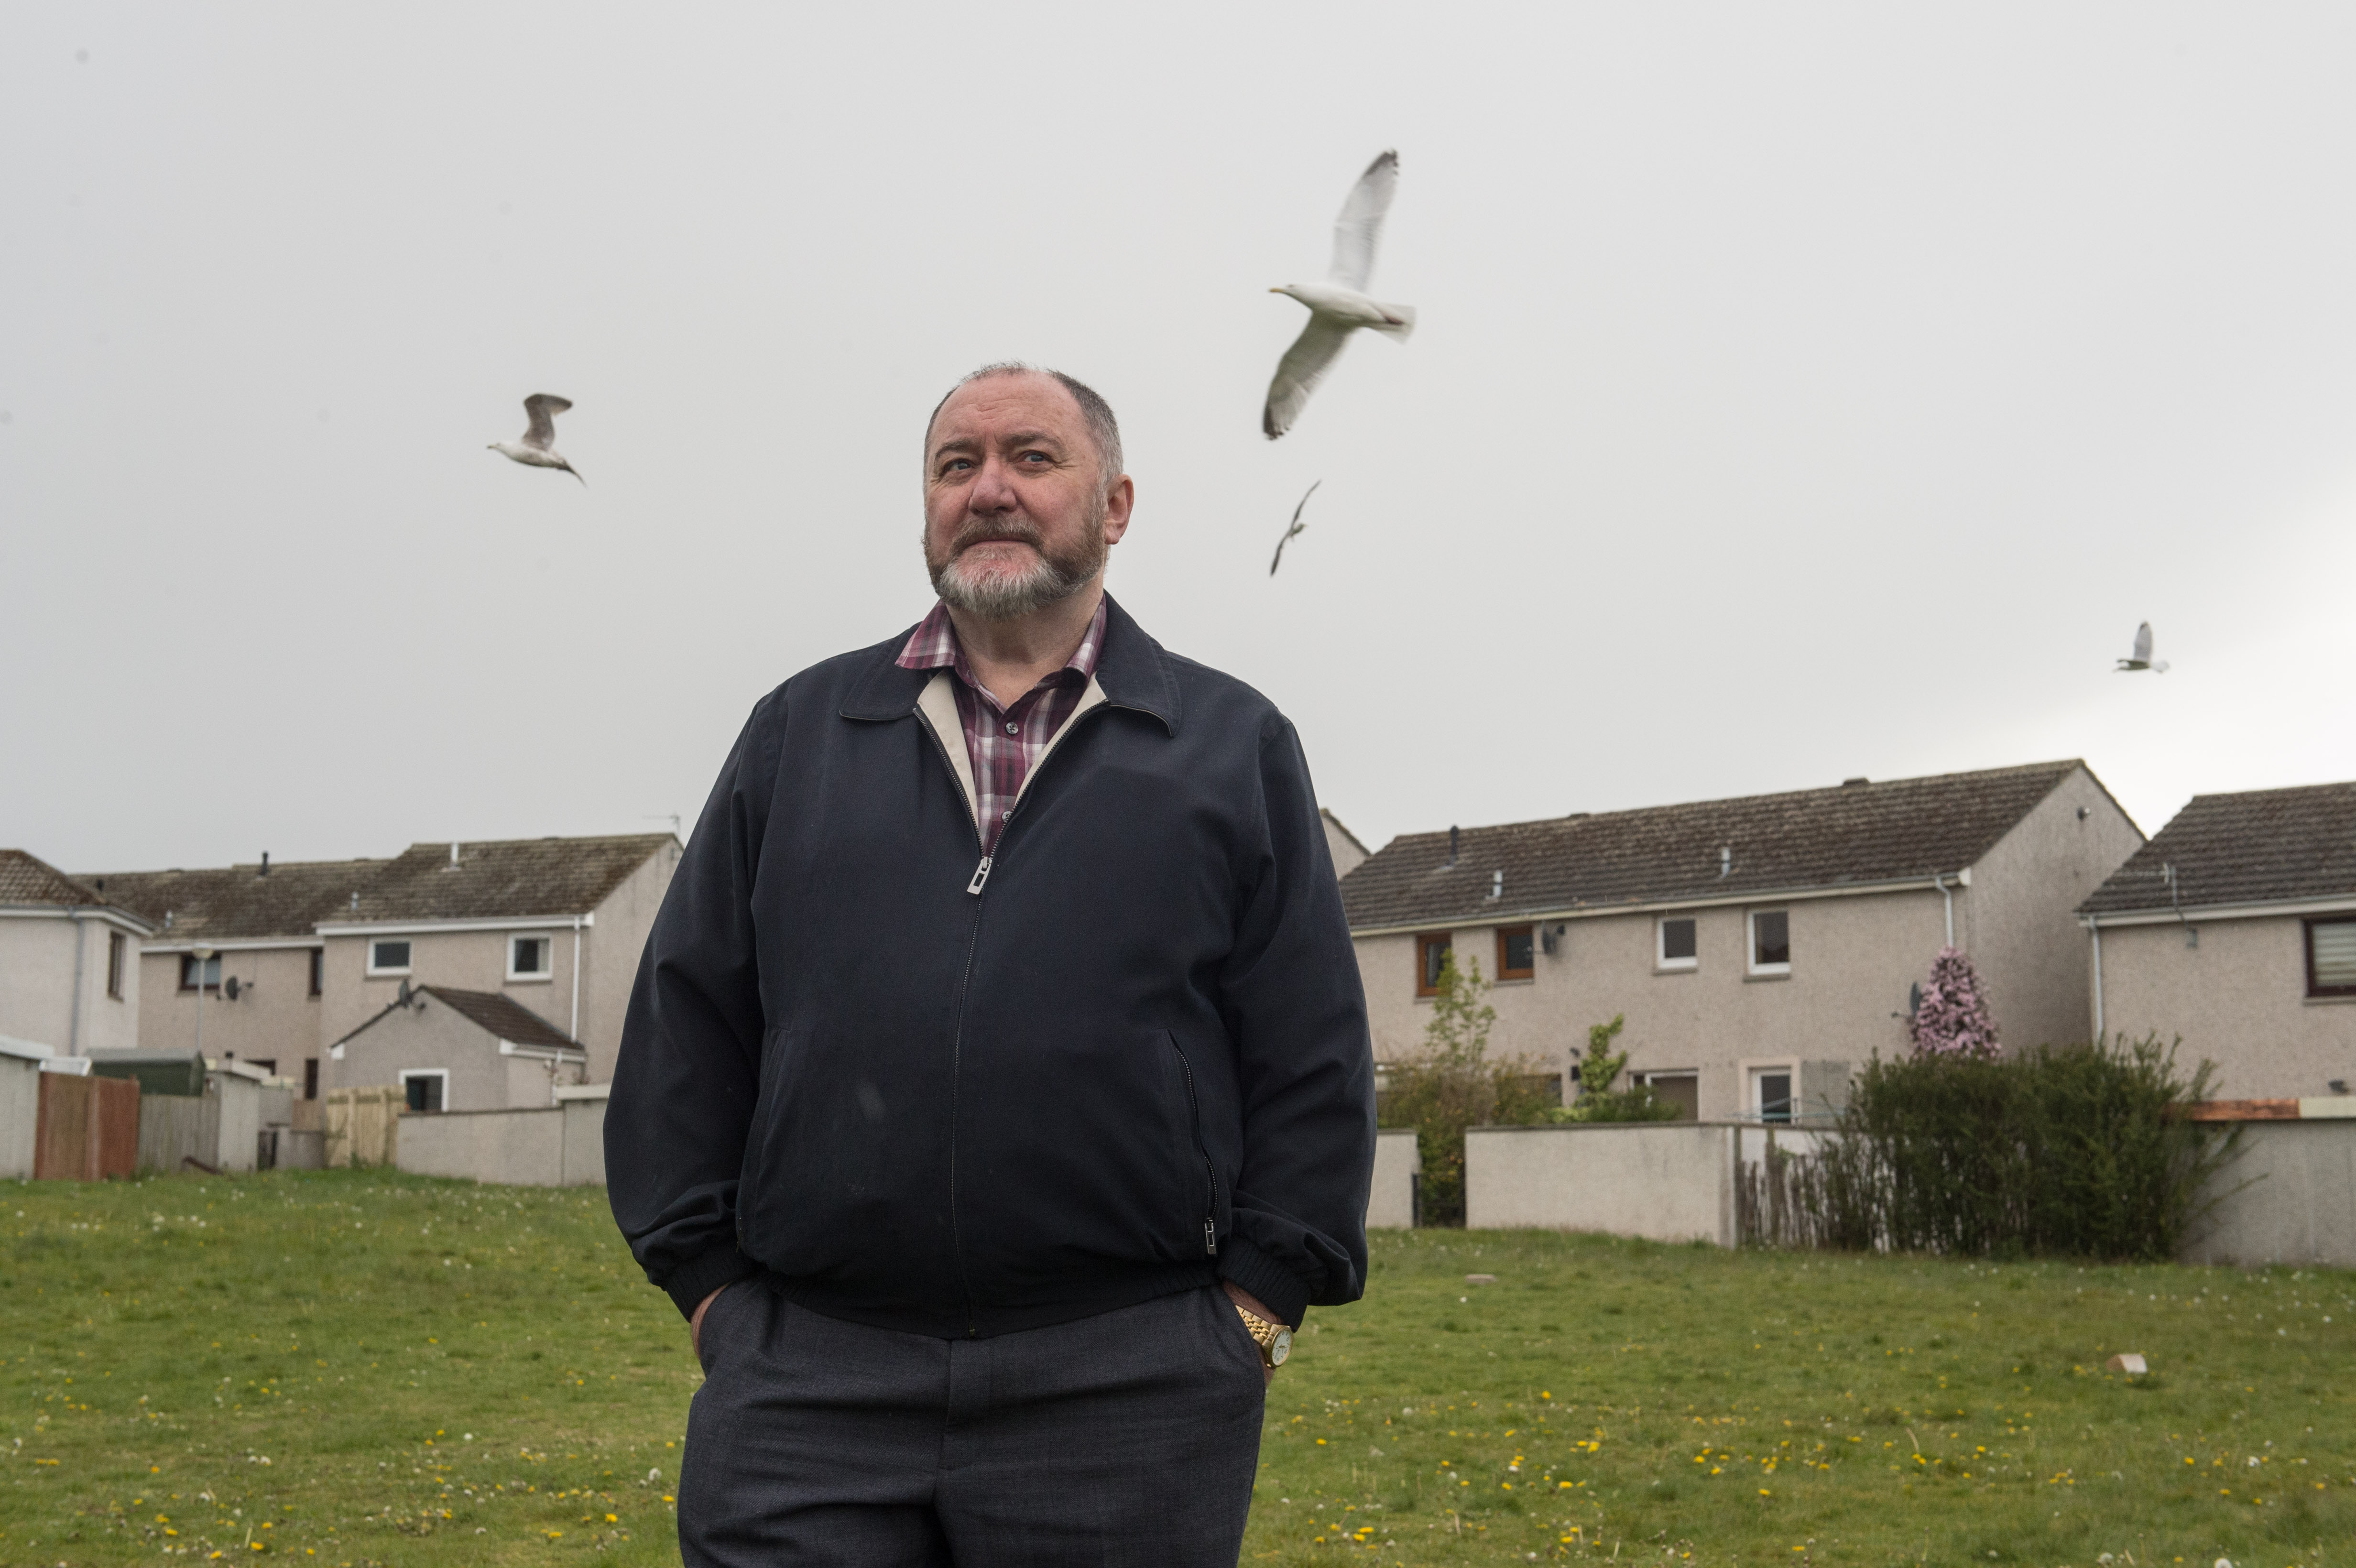 Cllr John Divers is pictured near his home in New Elgin, Moray. Picture by Jason Hedges.